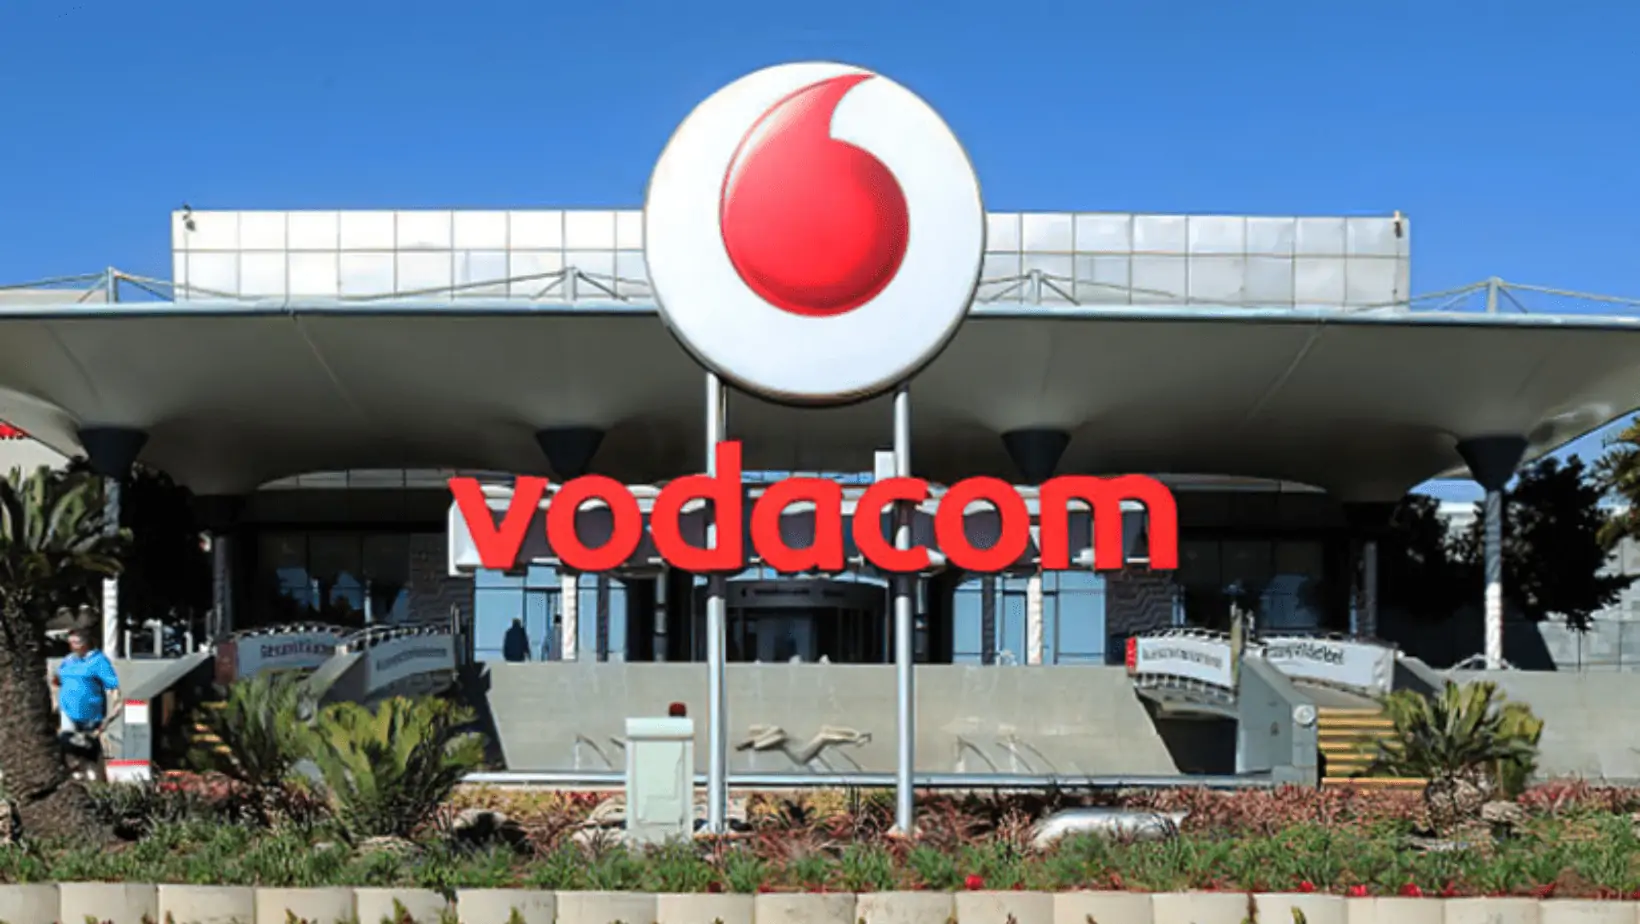 Vodacom: Director Shuffle Boosts Board with Global Expertise